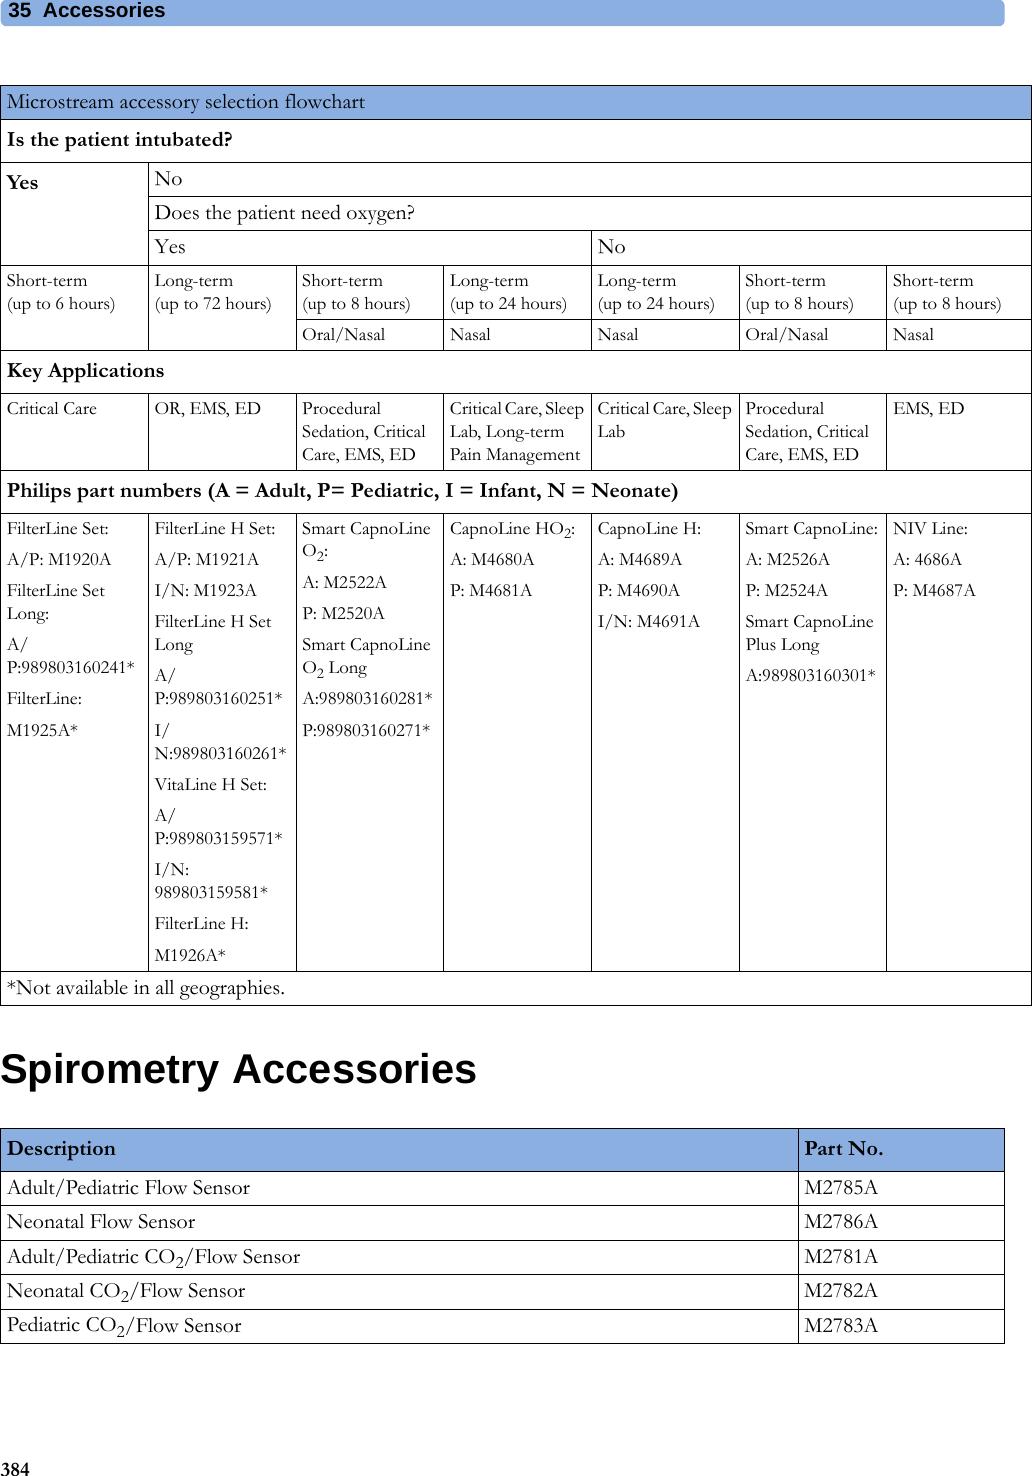 35 Accessories384Spirometry AccessoriesMicrostream accessory selection flowchartIs the patient intubated?Yes NoDoes the patient need oxygen?Yes NoShort-term(up to 6 hours)Long-term(up to 72 hours)Short-term(up to 8 hours)Long-term(up to 24 hours)Long-term(up to 24 hours)Short-term(up to 8 hours)Short-term(up to 8 hours)Oral/Nasal Nasal Nasal Oral/Nasal NasalKey ApplicationsCritical Care OR, EMS, ED Procedural Sedation, Critical Care, EMS, EDCritical Care, Sleep Lab, Long-term Pain ManagementCritical Care, Sleep LabProcedural Sedation, Critical Care, EMS, EDEMS, EDPhilips part numbers (A = Adult, P= Pediatric, I = Infant, N = Neonate)FilterLine Set:A/P: M1920AFilterLine Set Long:A/P:989803160241*FilterLine:M1925A*FilterLine H Set:A/P: M1921AI/N: M1923AFilterLine H Set LongA/P:989803160251*I/N:989803160261*VitaLine H Set:A/P:989803159571*I/N: 989803159581*FilterLine H:M1926A*Smart CapnoLine O2:A: M2522AP: M2520ASmart CapnoLine O2 LongA:989803160281*P:989803160271*CapnoLine HO2:A: M4680AP: M4681ACapnoLine H:A: M4689AP: M4690AI/N: M4691ASmart CapnoLine:A: M2526AP: M2524ASmart CapnoLine Plus LongA:989803160301*NIV Line:A: 4686AP: M4687A*Not available in all geographies.Description Part No.Adult/Pediatric Flow Sensor M2785ANeonatal Flow Sensor M2786AAdult/Pediatric CO2/Flow Sensor M2781ANeonatal CO2/Flow Sensor M2782APediatric CO2/Flow Sensor M2783A